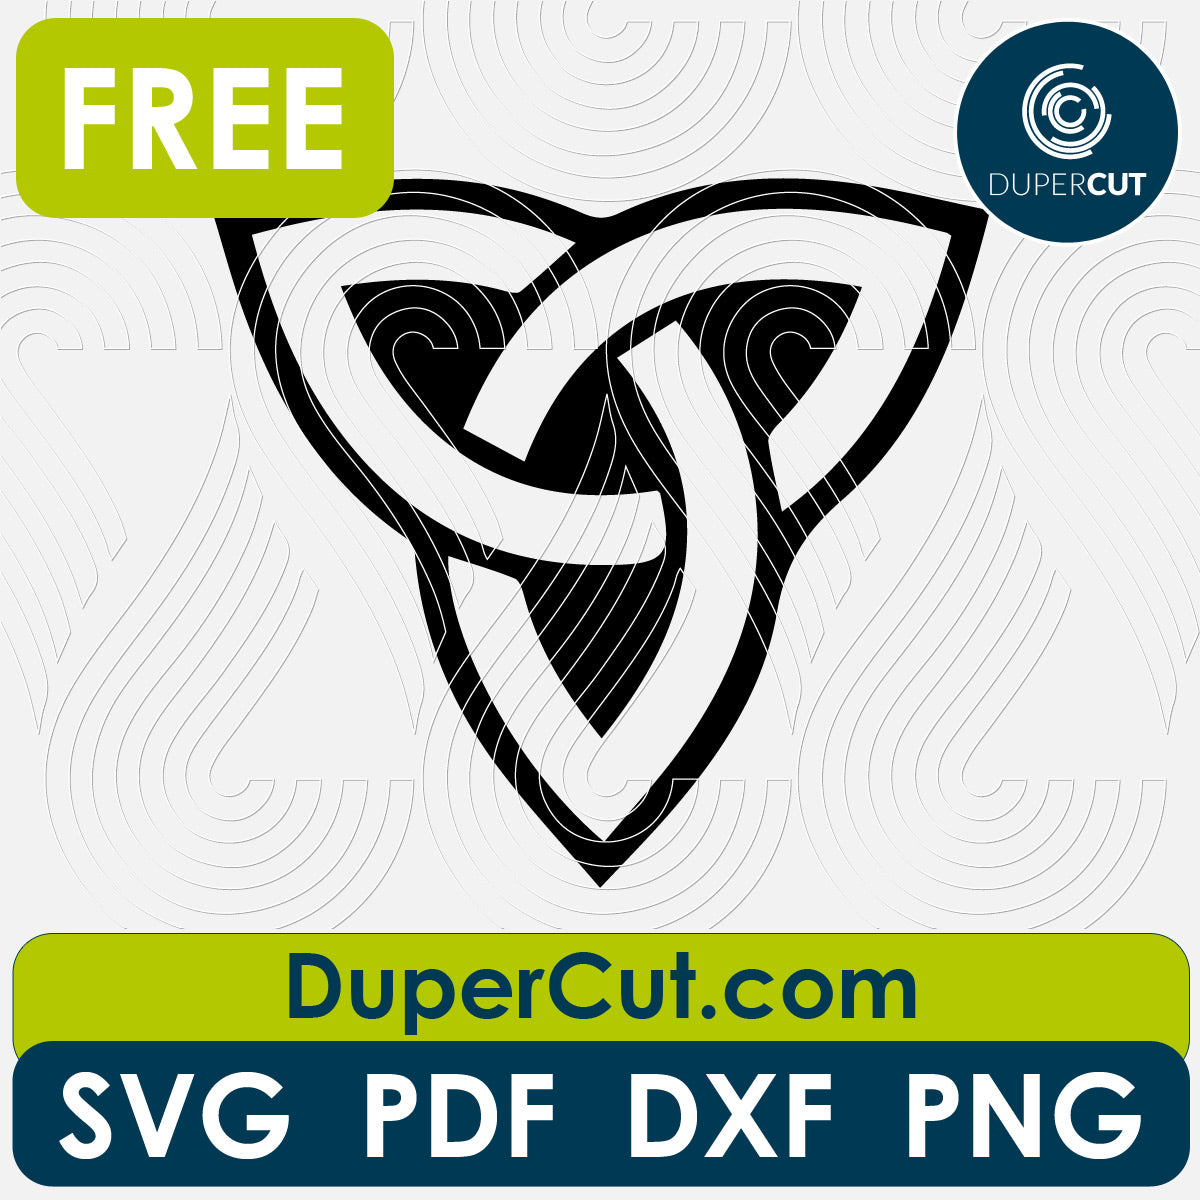 Celtic knot irish design, FREE cutting template SVG PNG DXF files for Glowforge, Cricut, Silhouette, CNC laser router by DuperCut.com